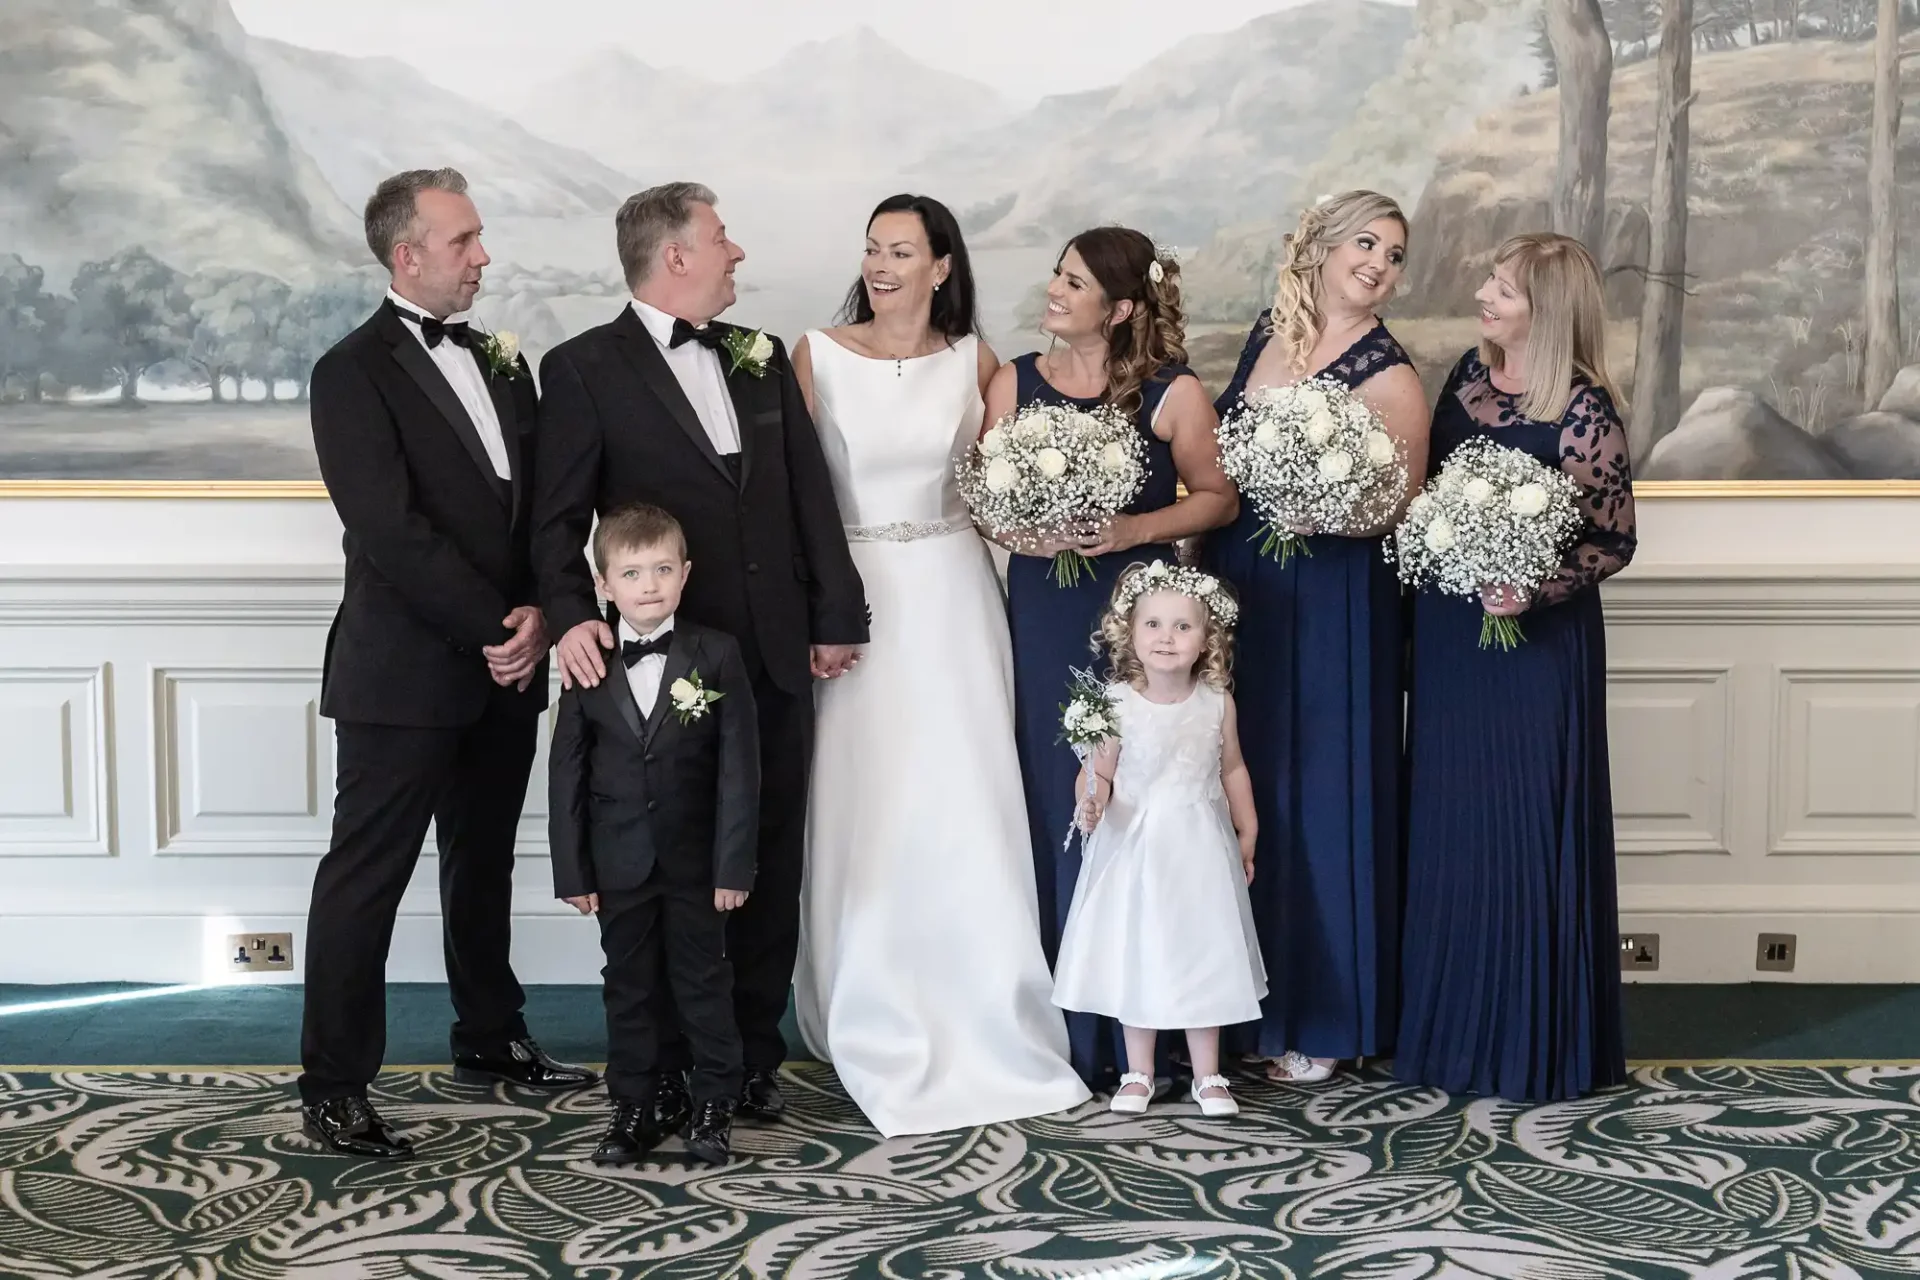 A wedding party posing indoors, featuring a bride and groom surrounded by four adults and two children, all dressed in formal attire.